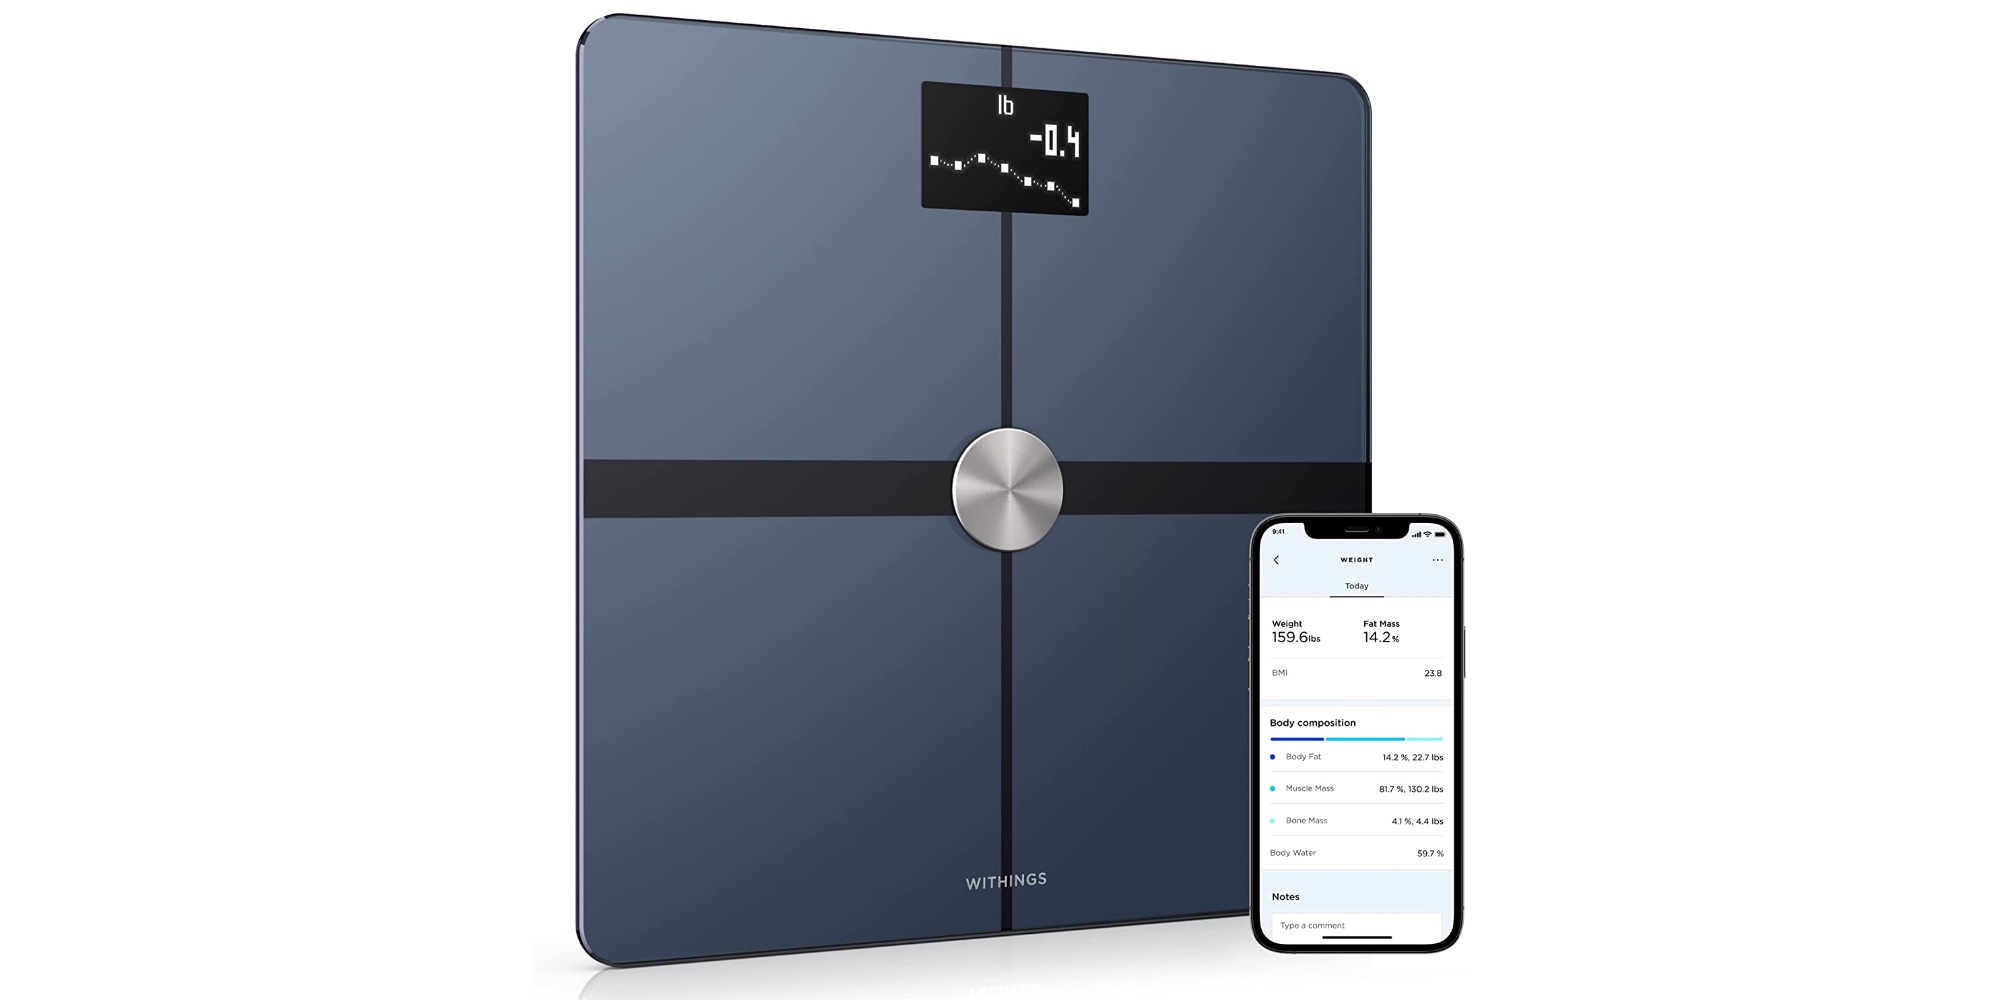 https://9to5toys.com/wp-content/uploads/sites/5/2022/01/Withings-Body-Smart-Scale-.jpg